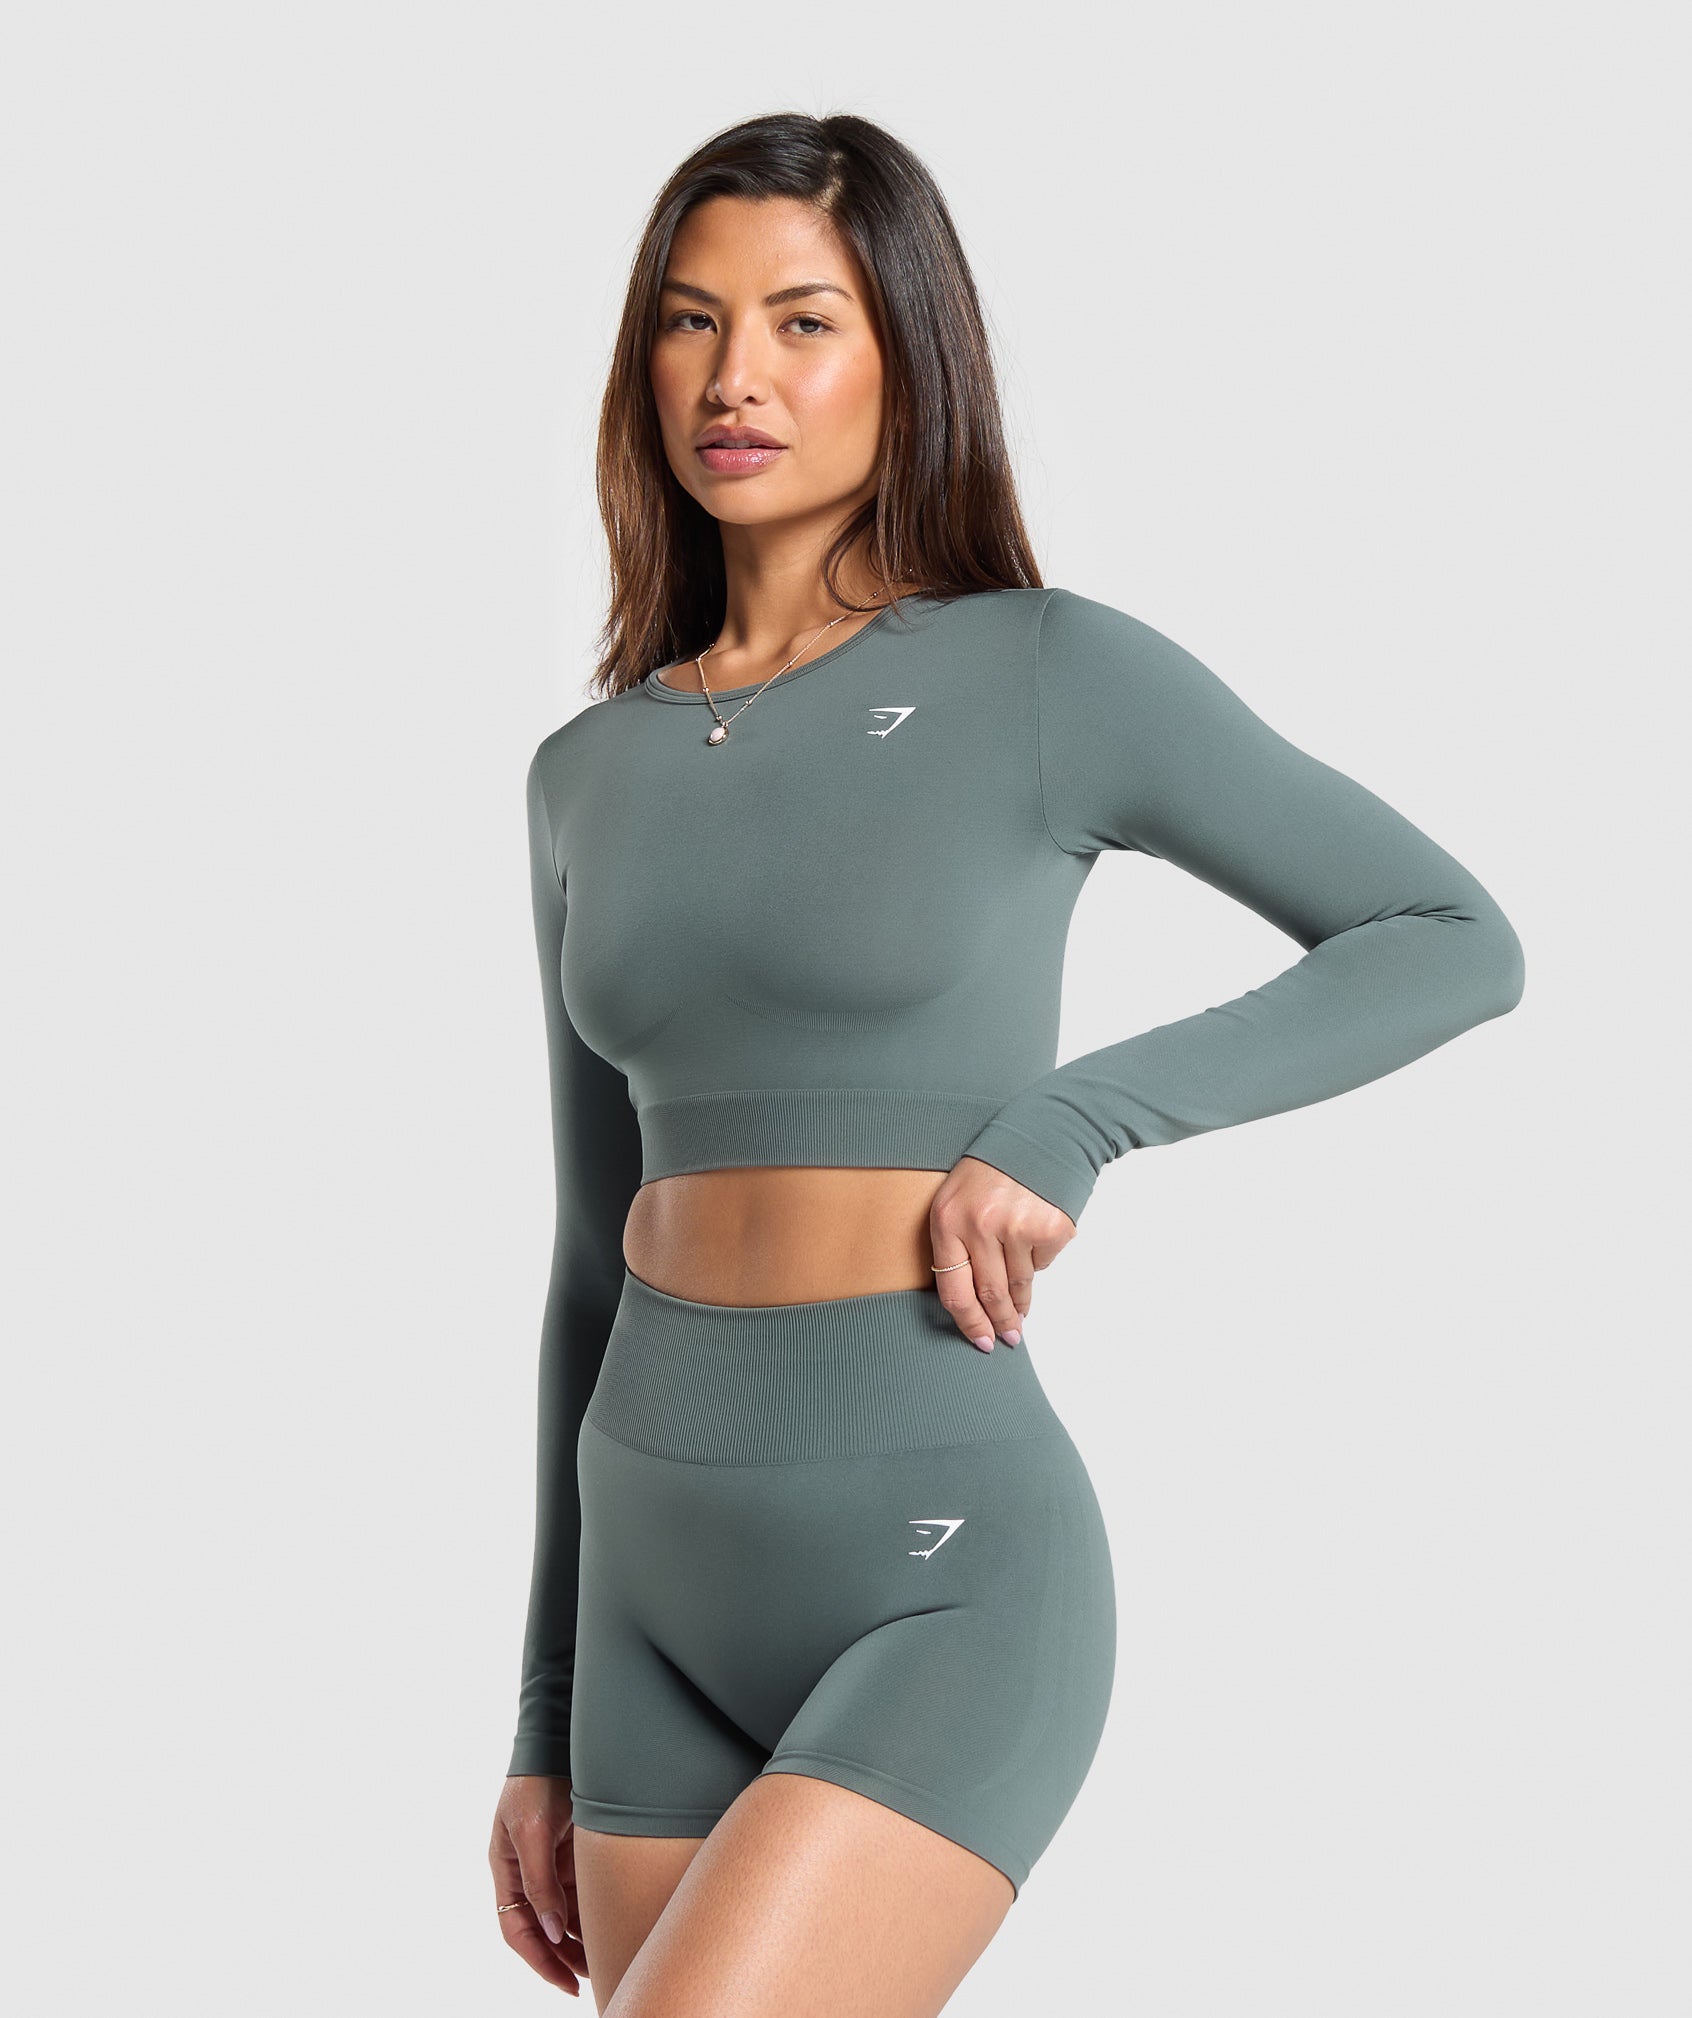 Everyday Seamless Long Sleeve Crop Top in Cargo Teal - view 3